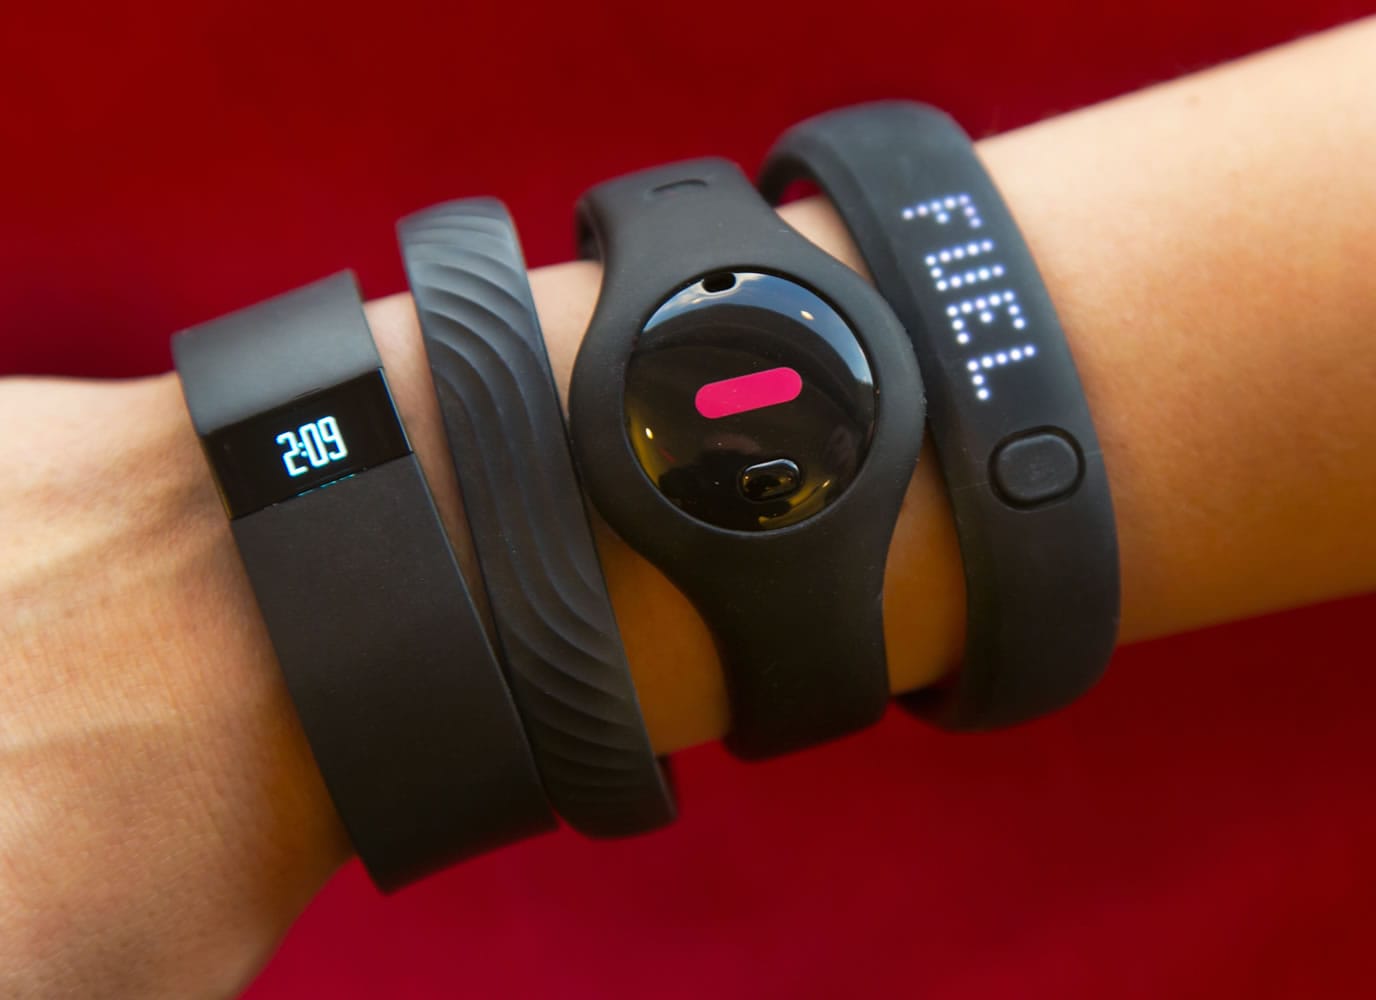 Four fitness trackers, from left: Fitbit Force, Jawbone Up, Fitbug Orb, and the Nike FuelBand SE.